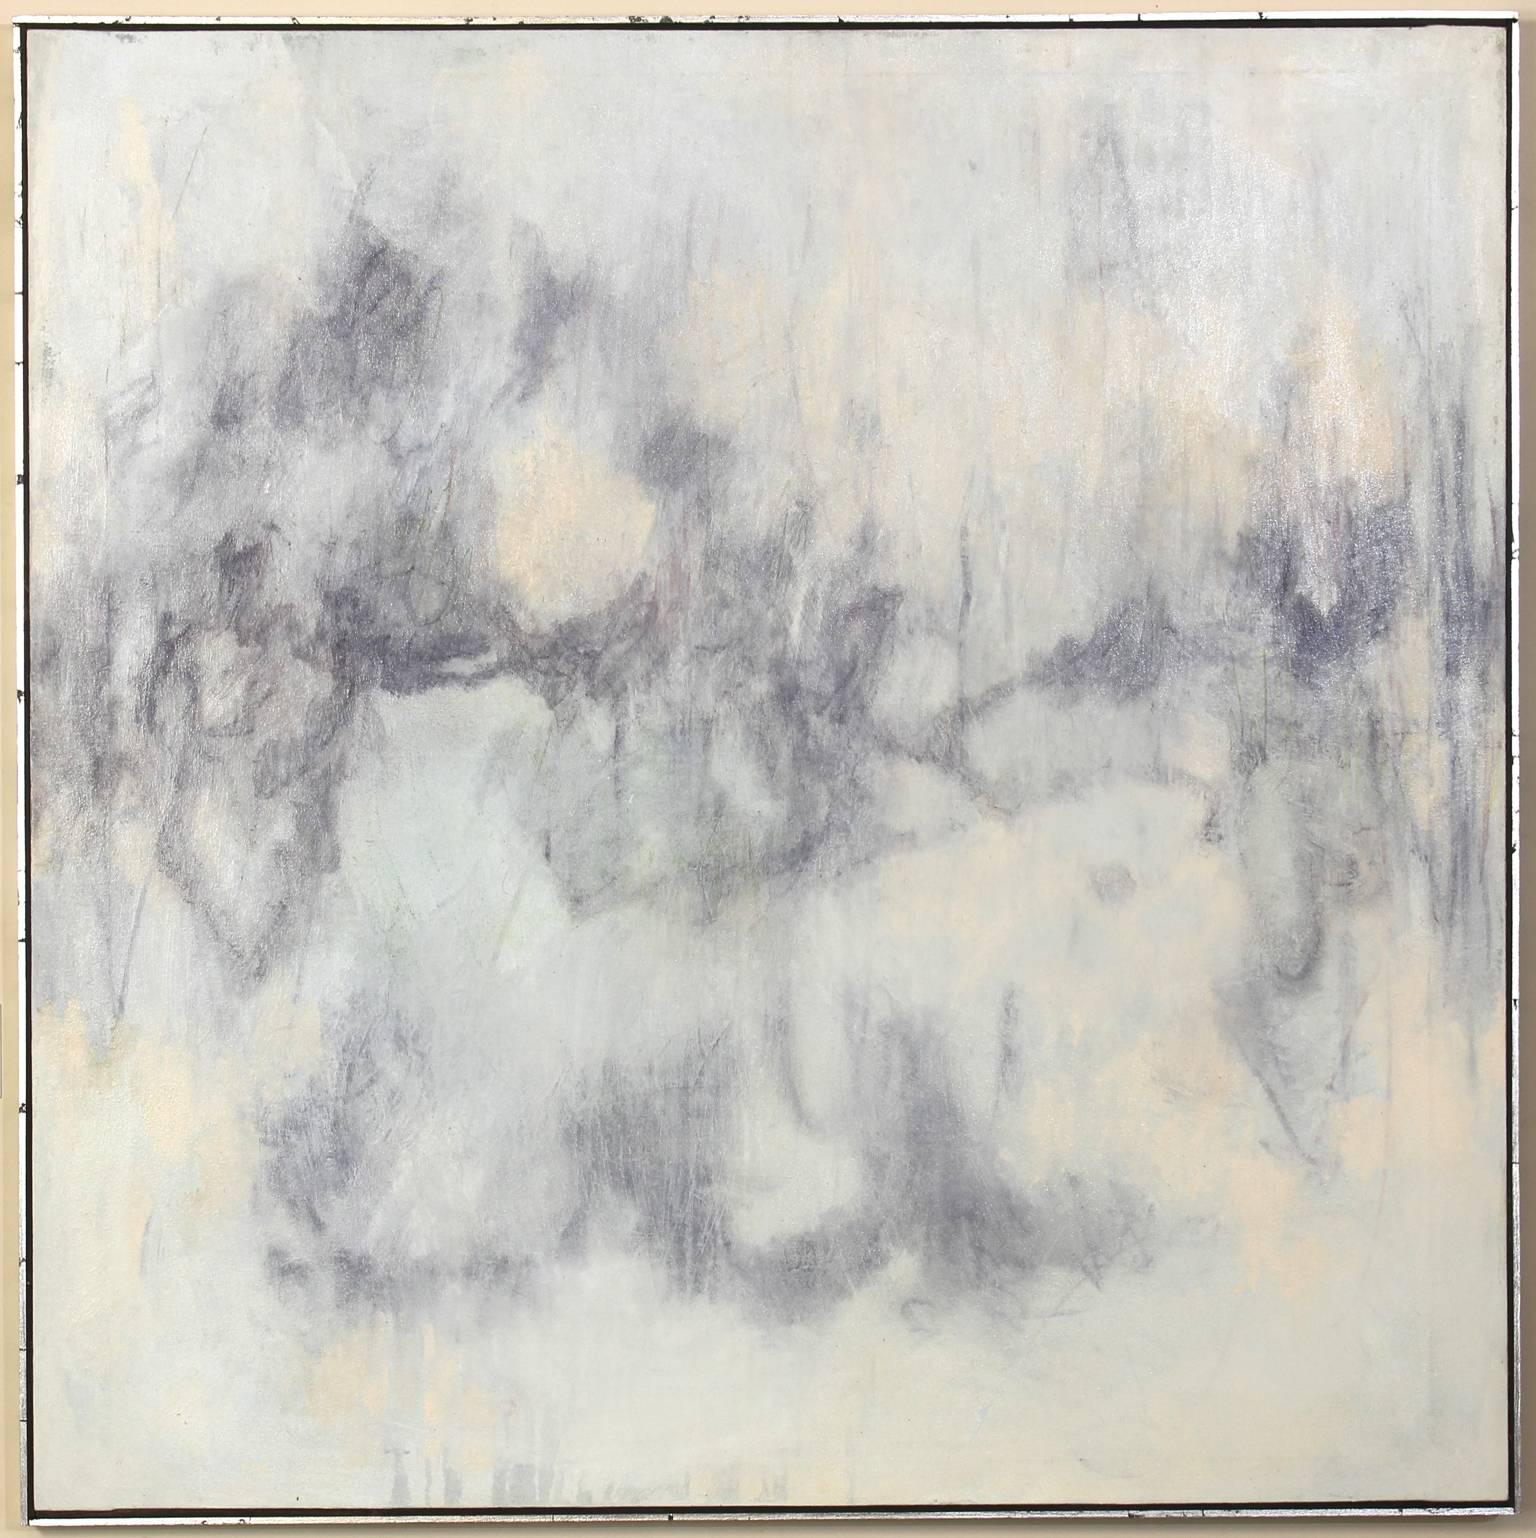 A large contemporary abstract painting in soft blues melding into dark greys on a soft pastel colored field.